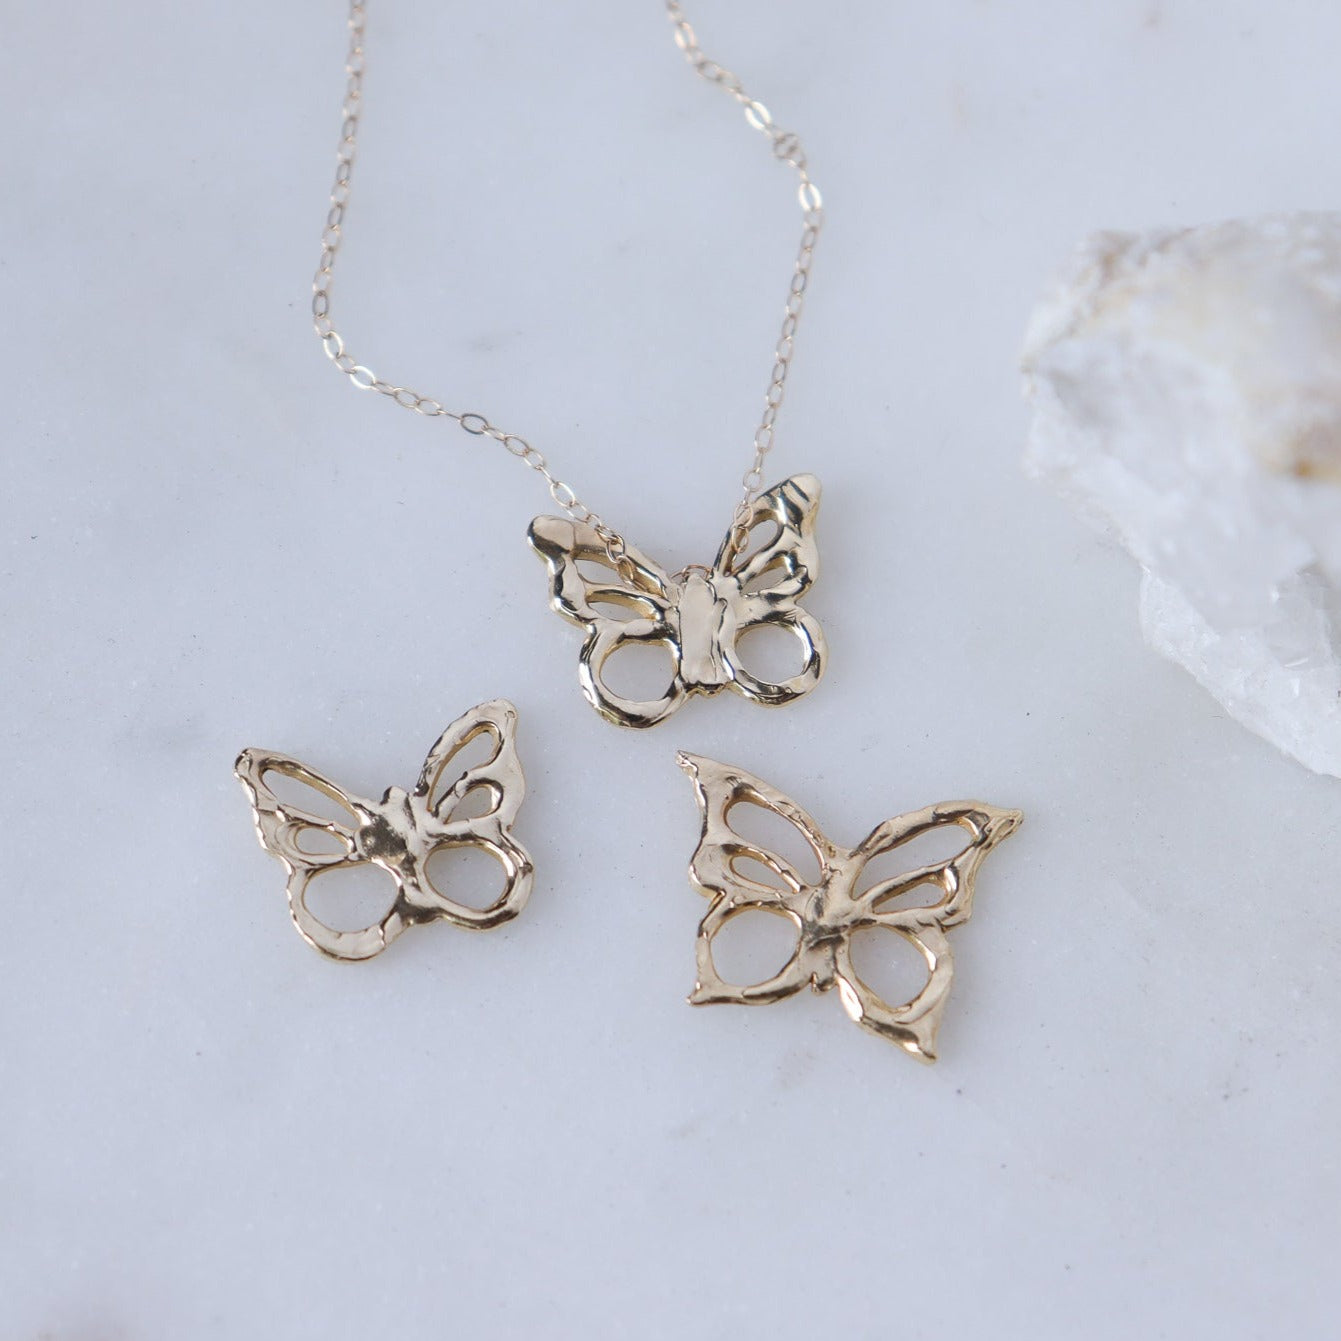 An array of 14k gold butterfly charms with one of the charms shown worn as a necklace.